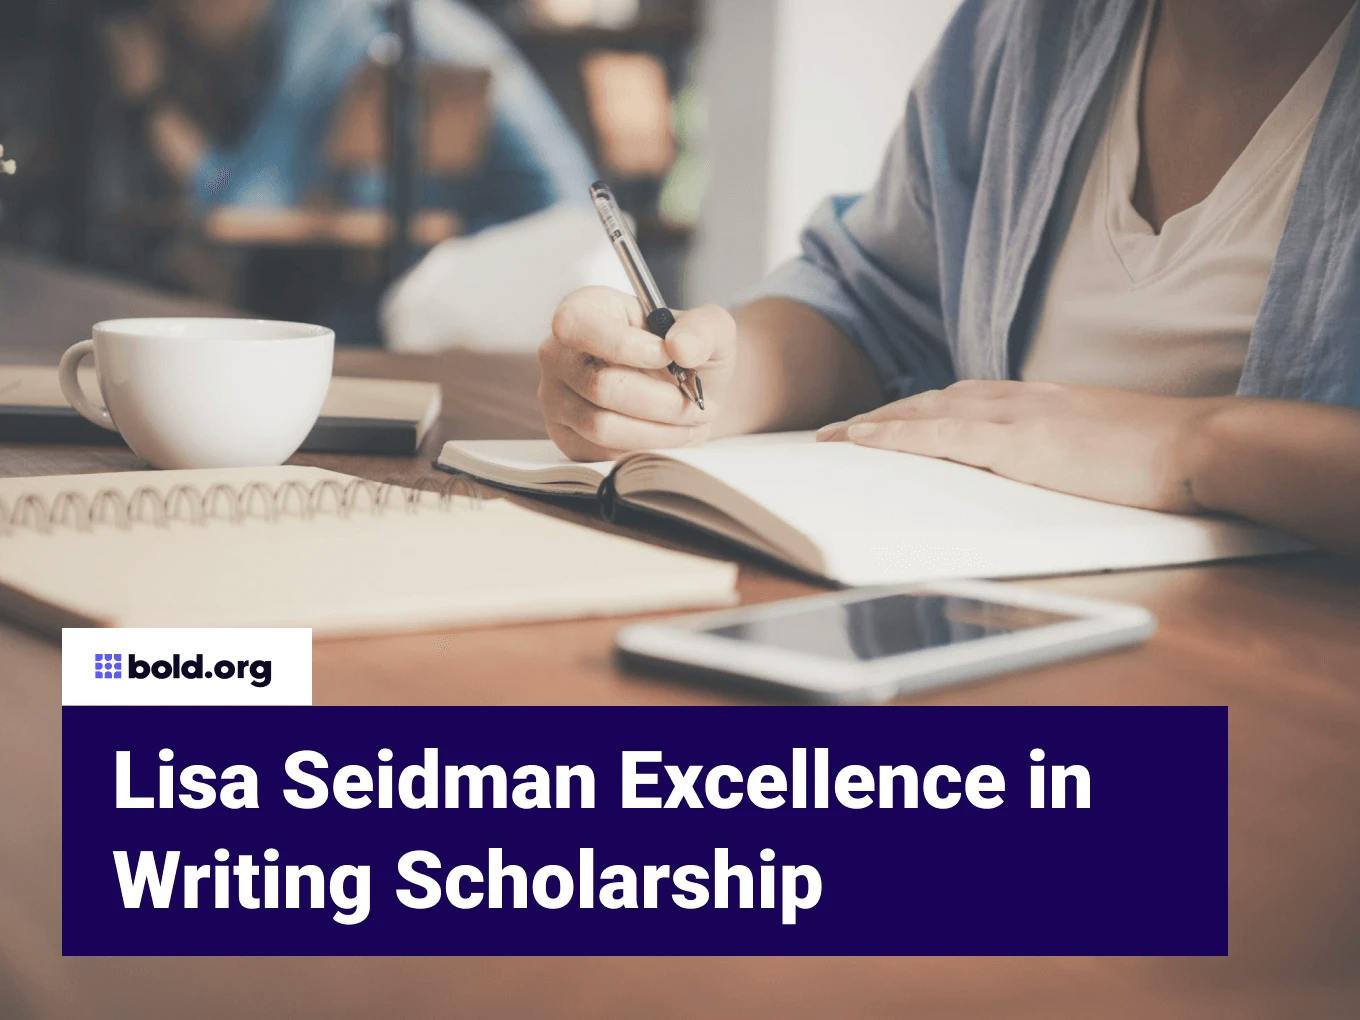 Lisa Seidman Excellence in Writing Scholarship